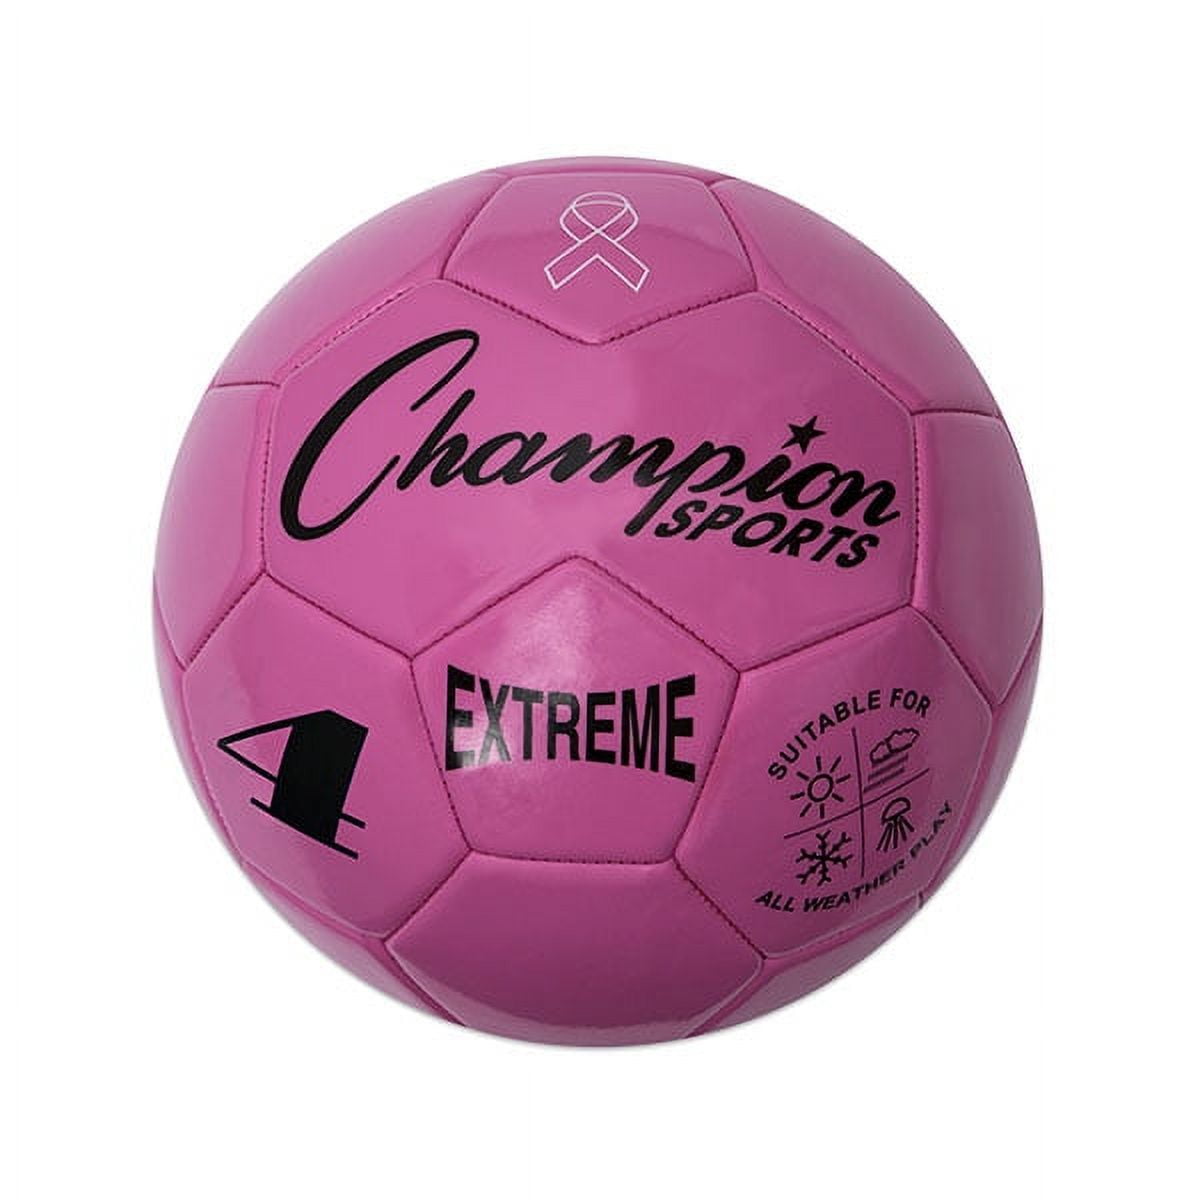 Champion Sports EX4PK 8.25 in. Extreme Series Size 4 Soccer Ball, Pink